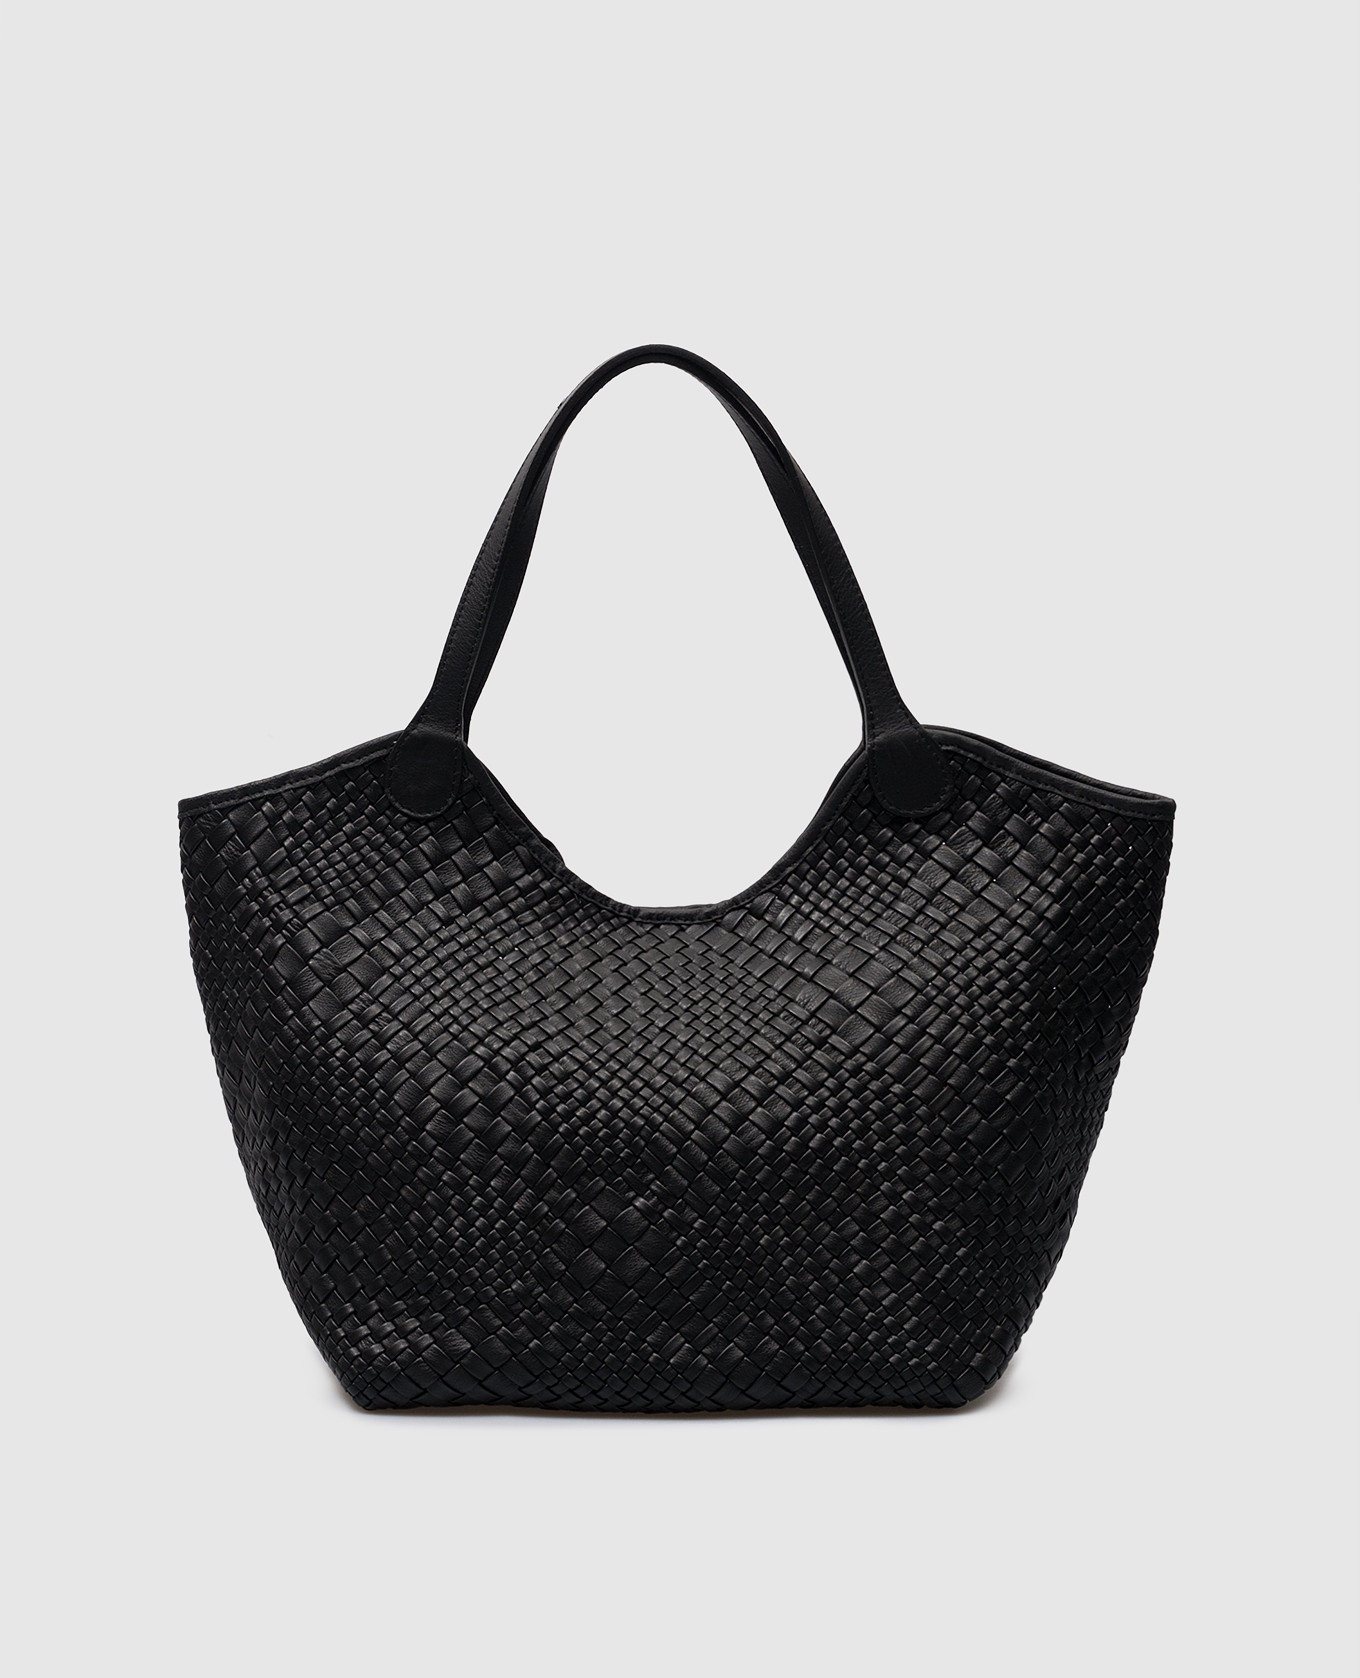 Black leather woven tote bag